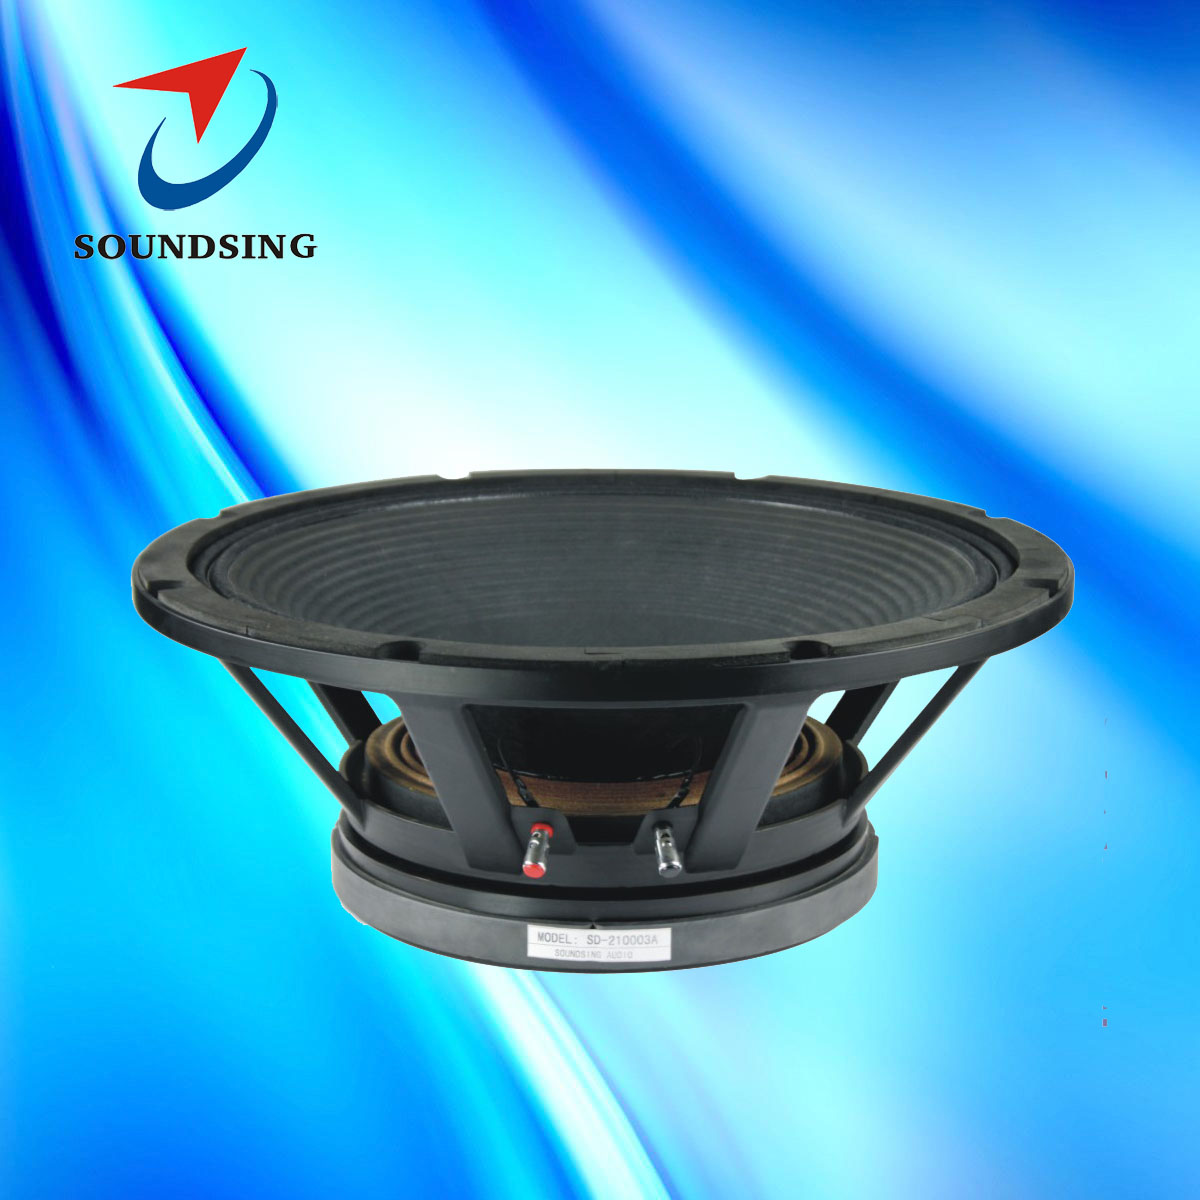 SD-21003A super powerful 21' subwoofer